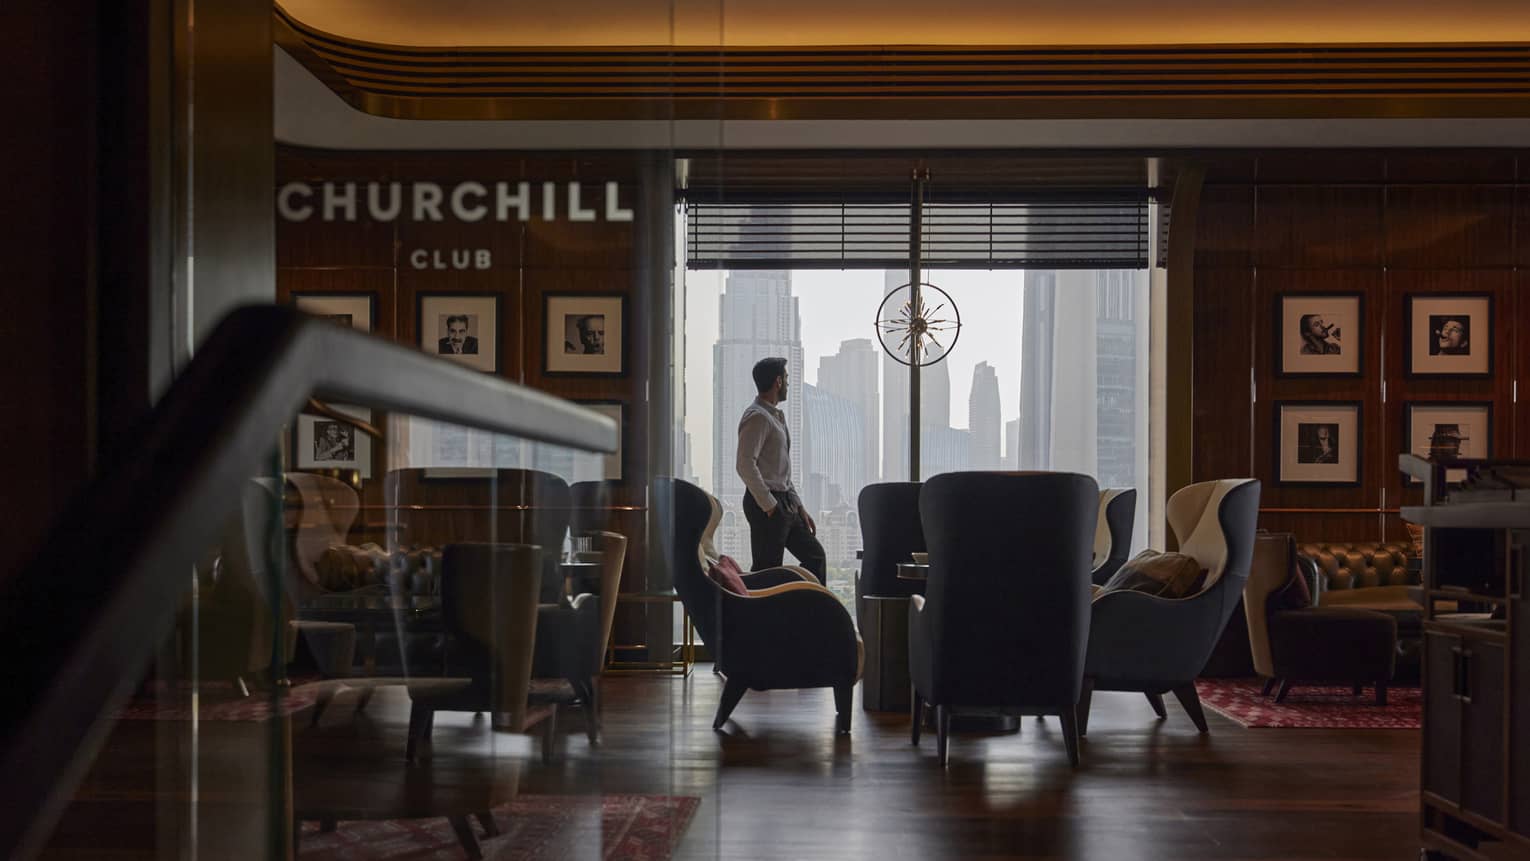 Man stands by a floor-to-ceiling window looking out on the city skyline in a dimly lit cigar bar filled with club chairs and leather sofas